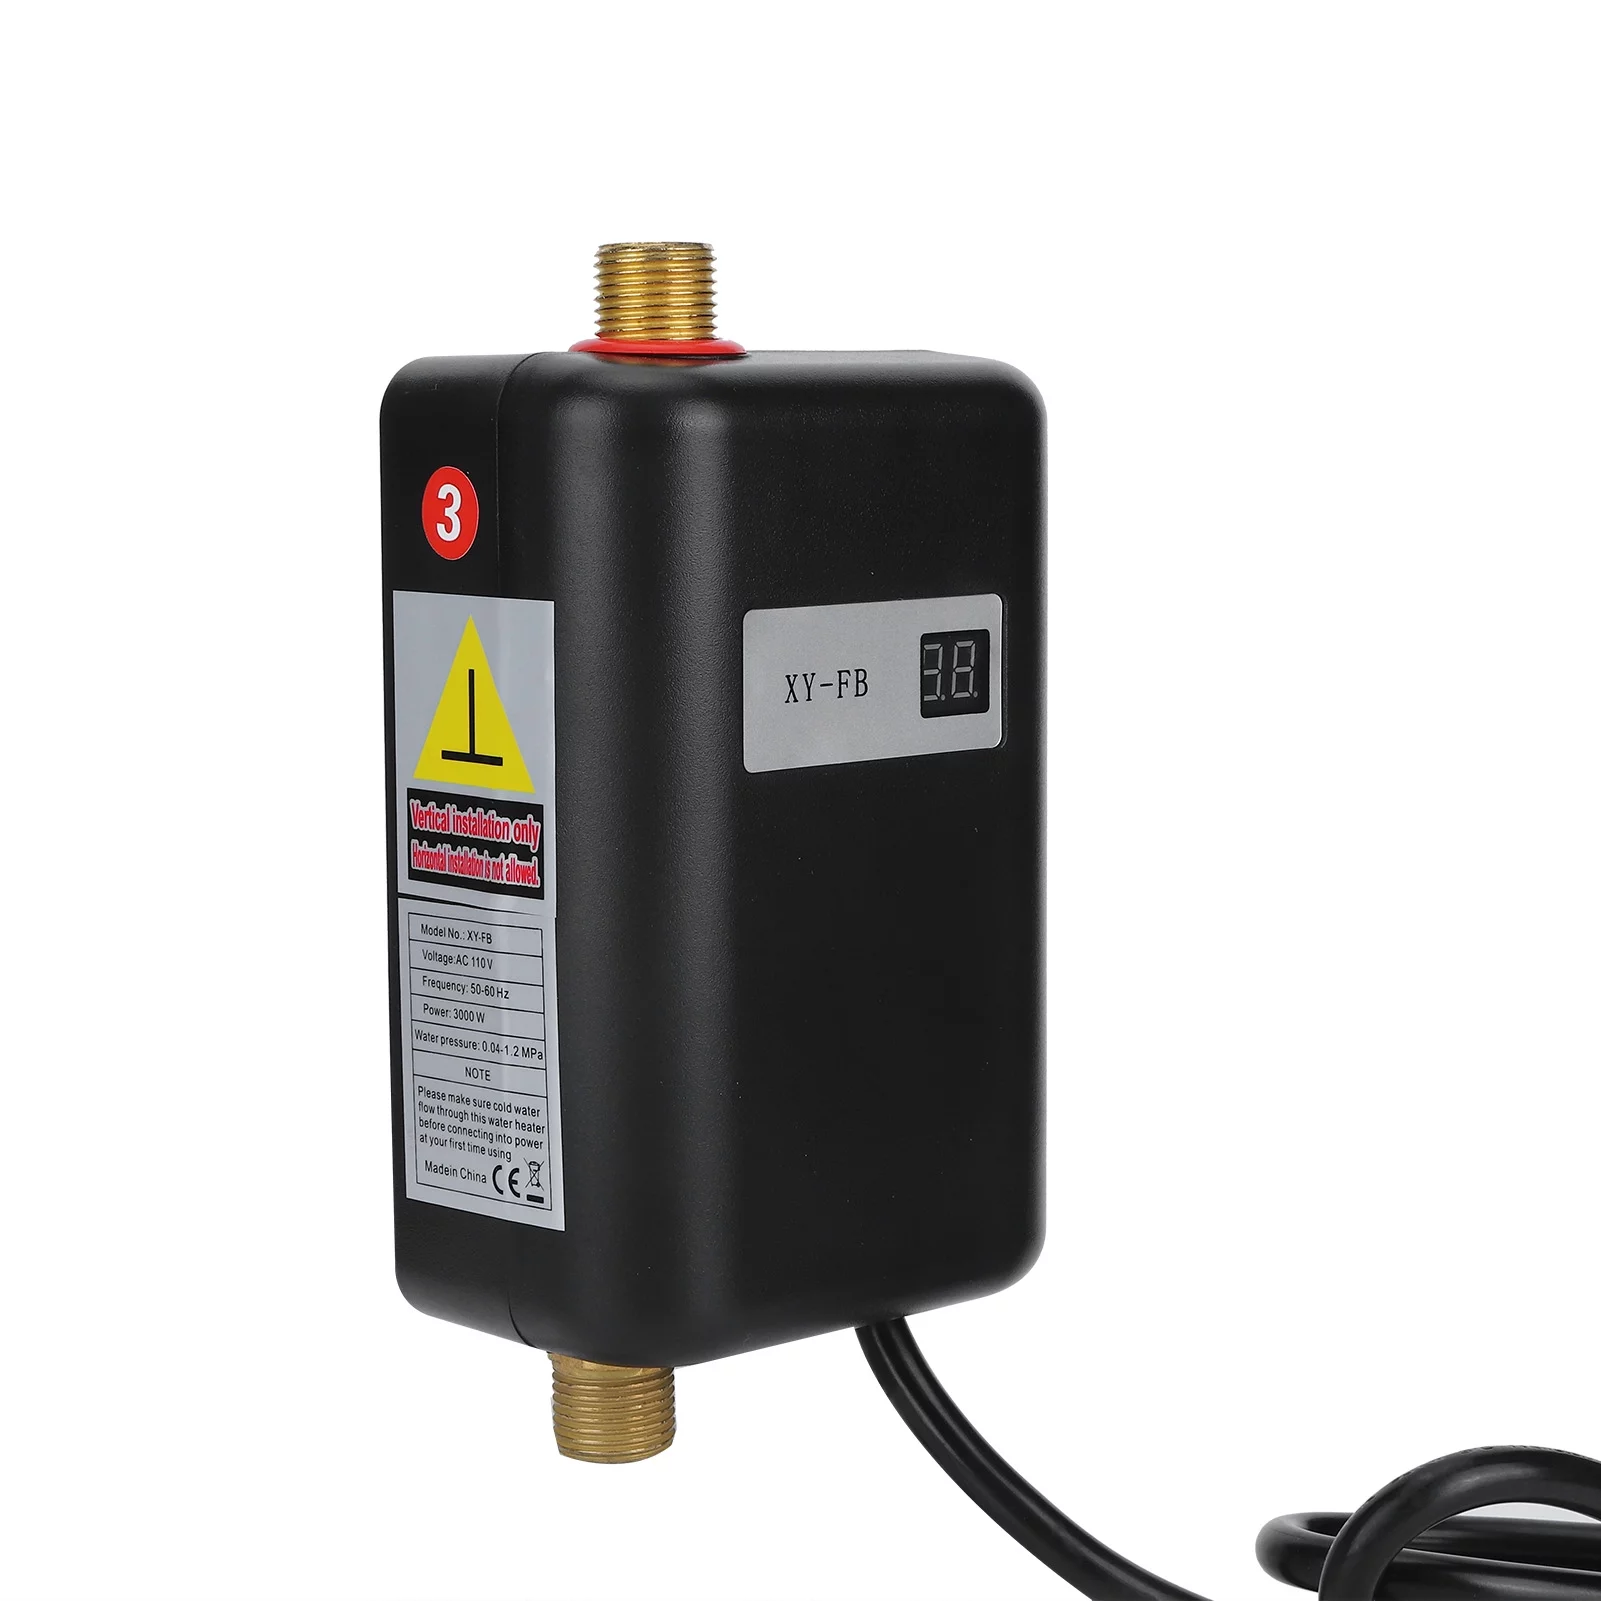 11 Best Instant Hot Water Heater for 2023